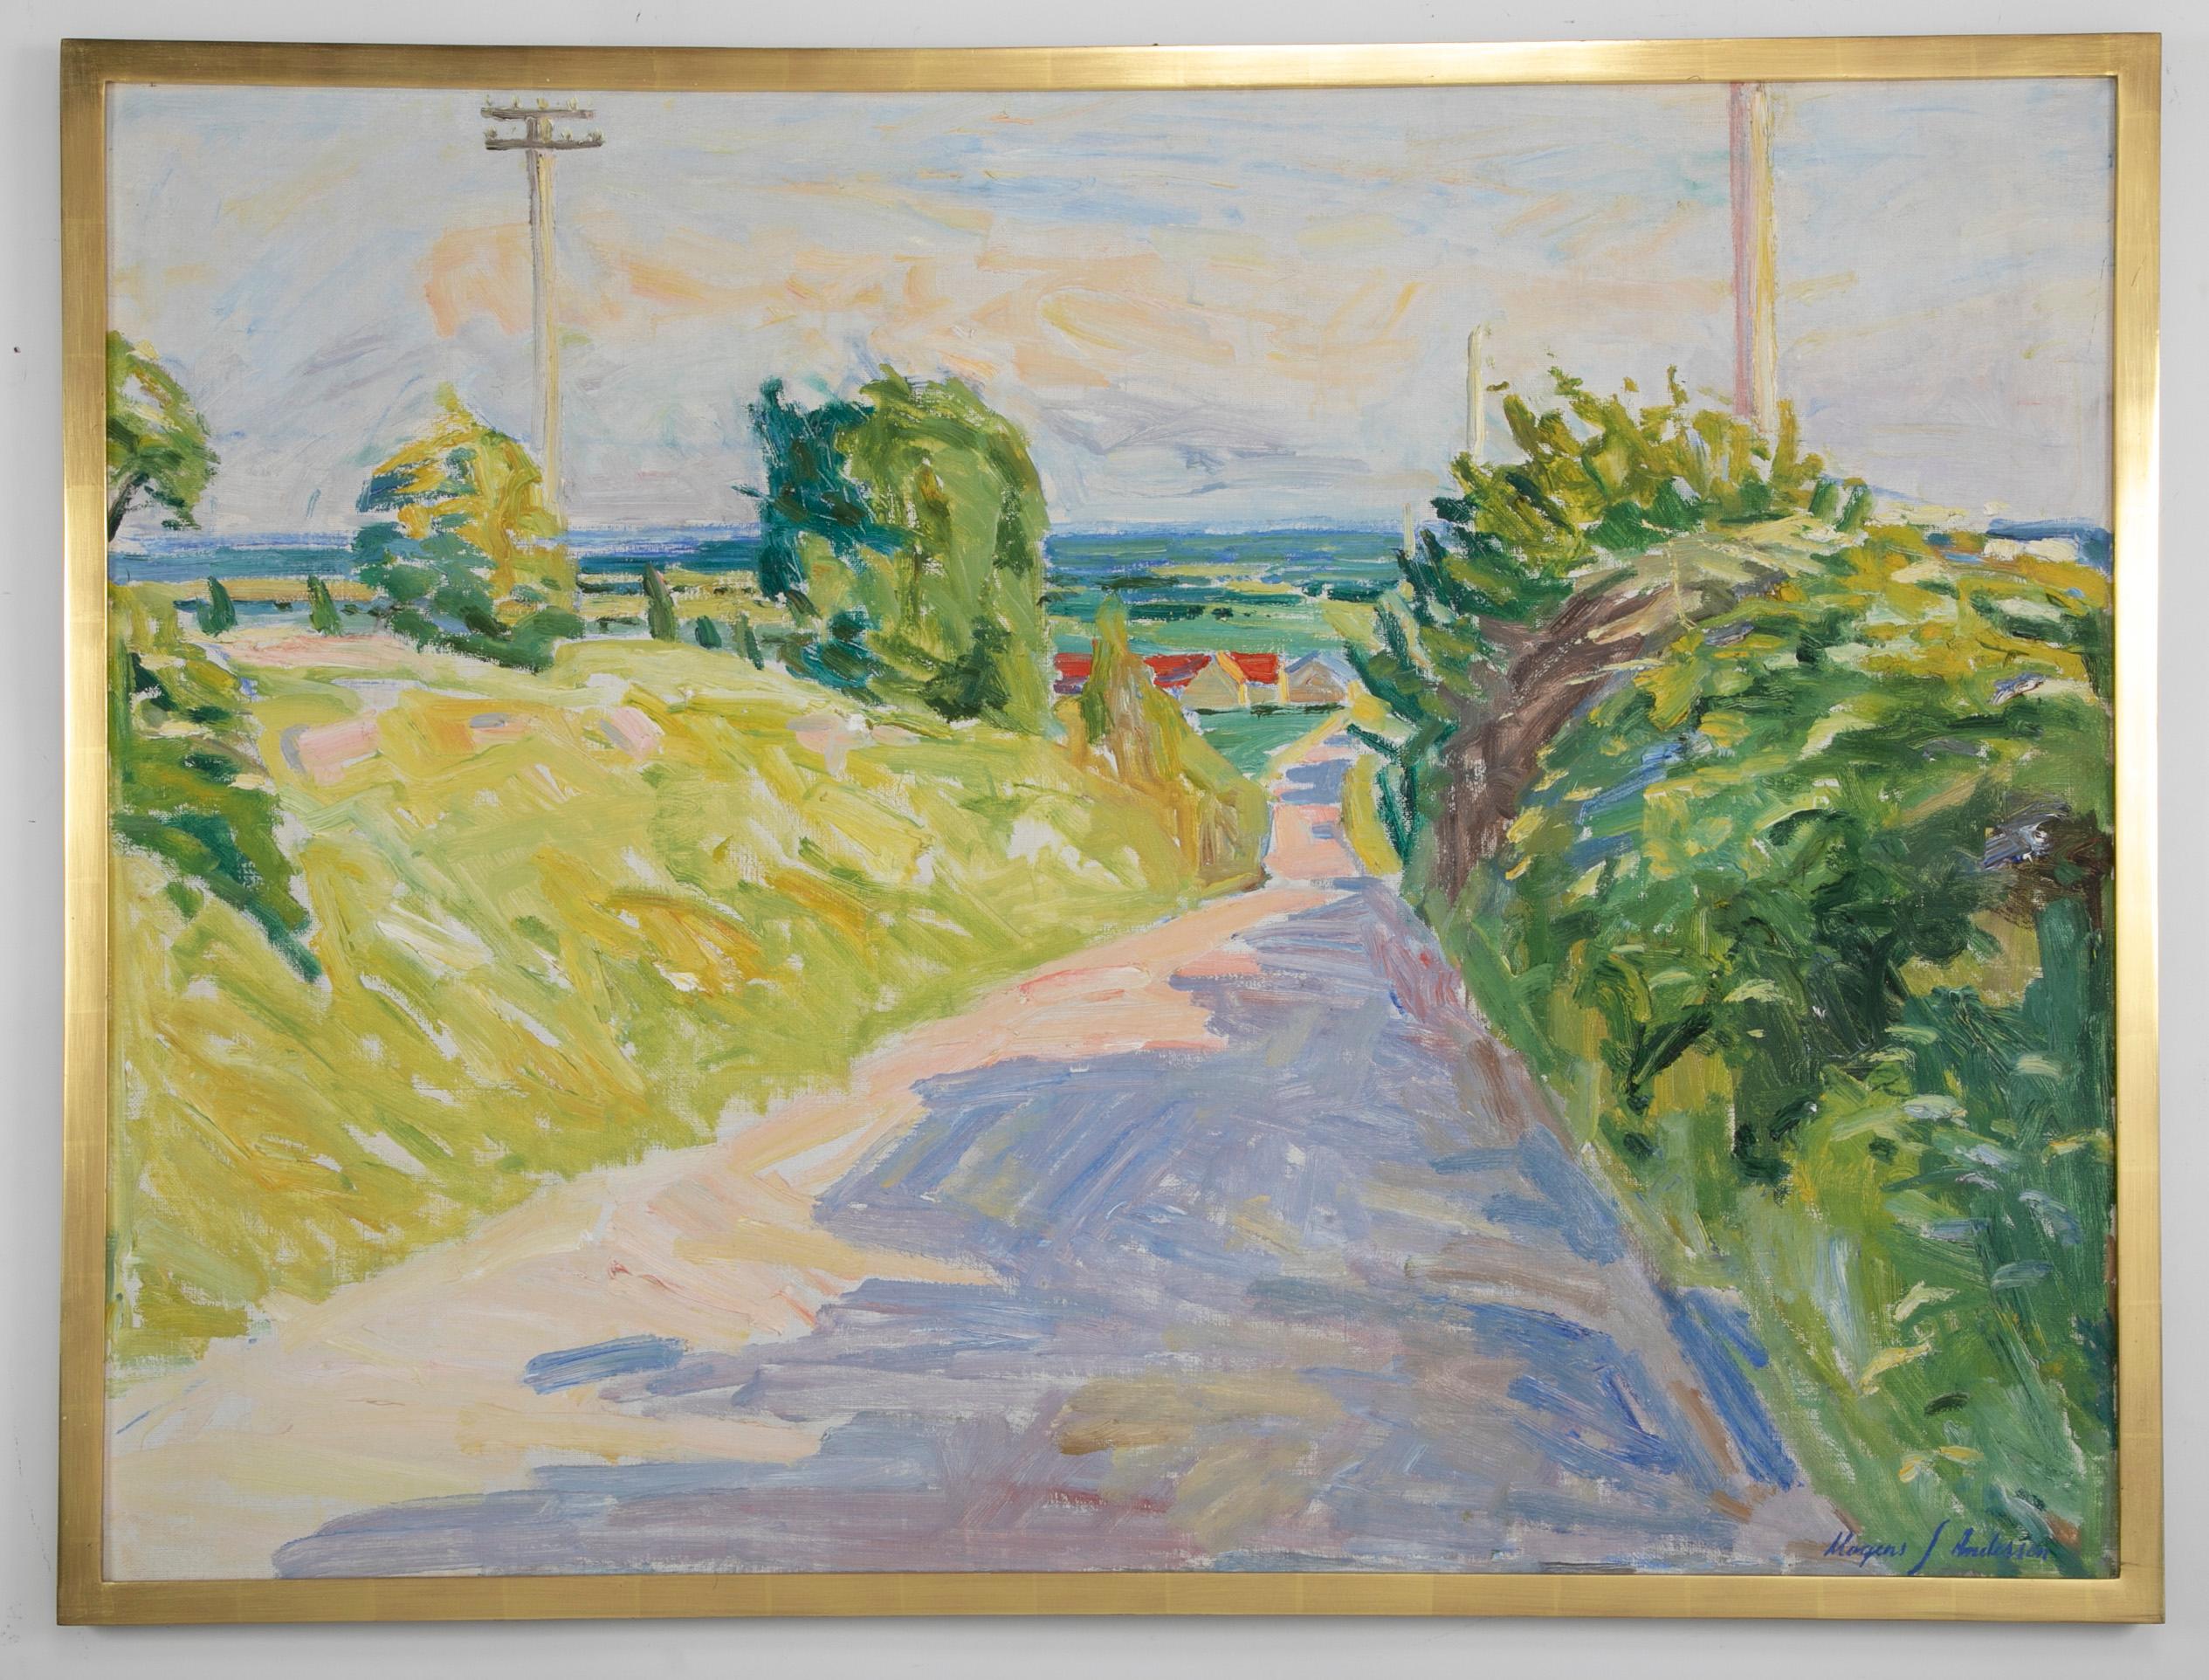 20th century oil on canvas of a summertime landscape by Danish artist Mogens Anderson (b. 1909 - d. 2002). Signed lower right.